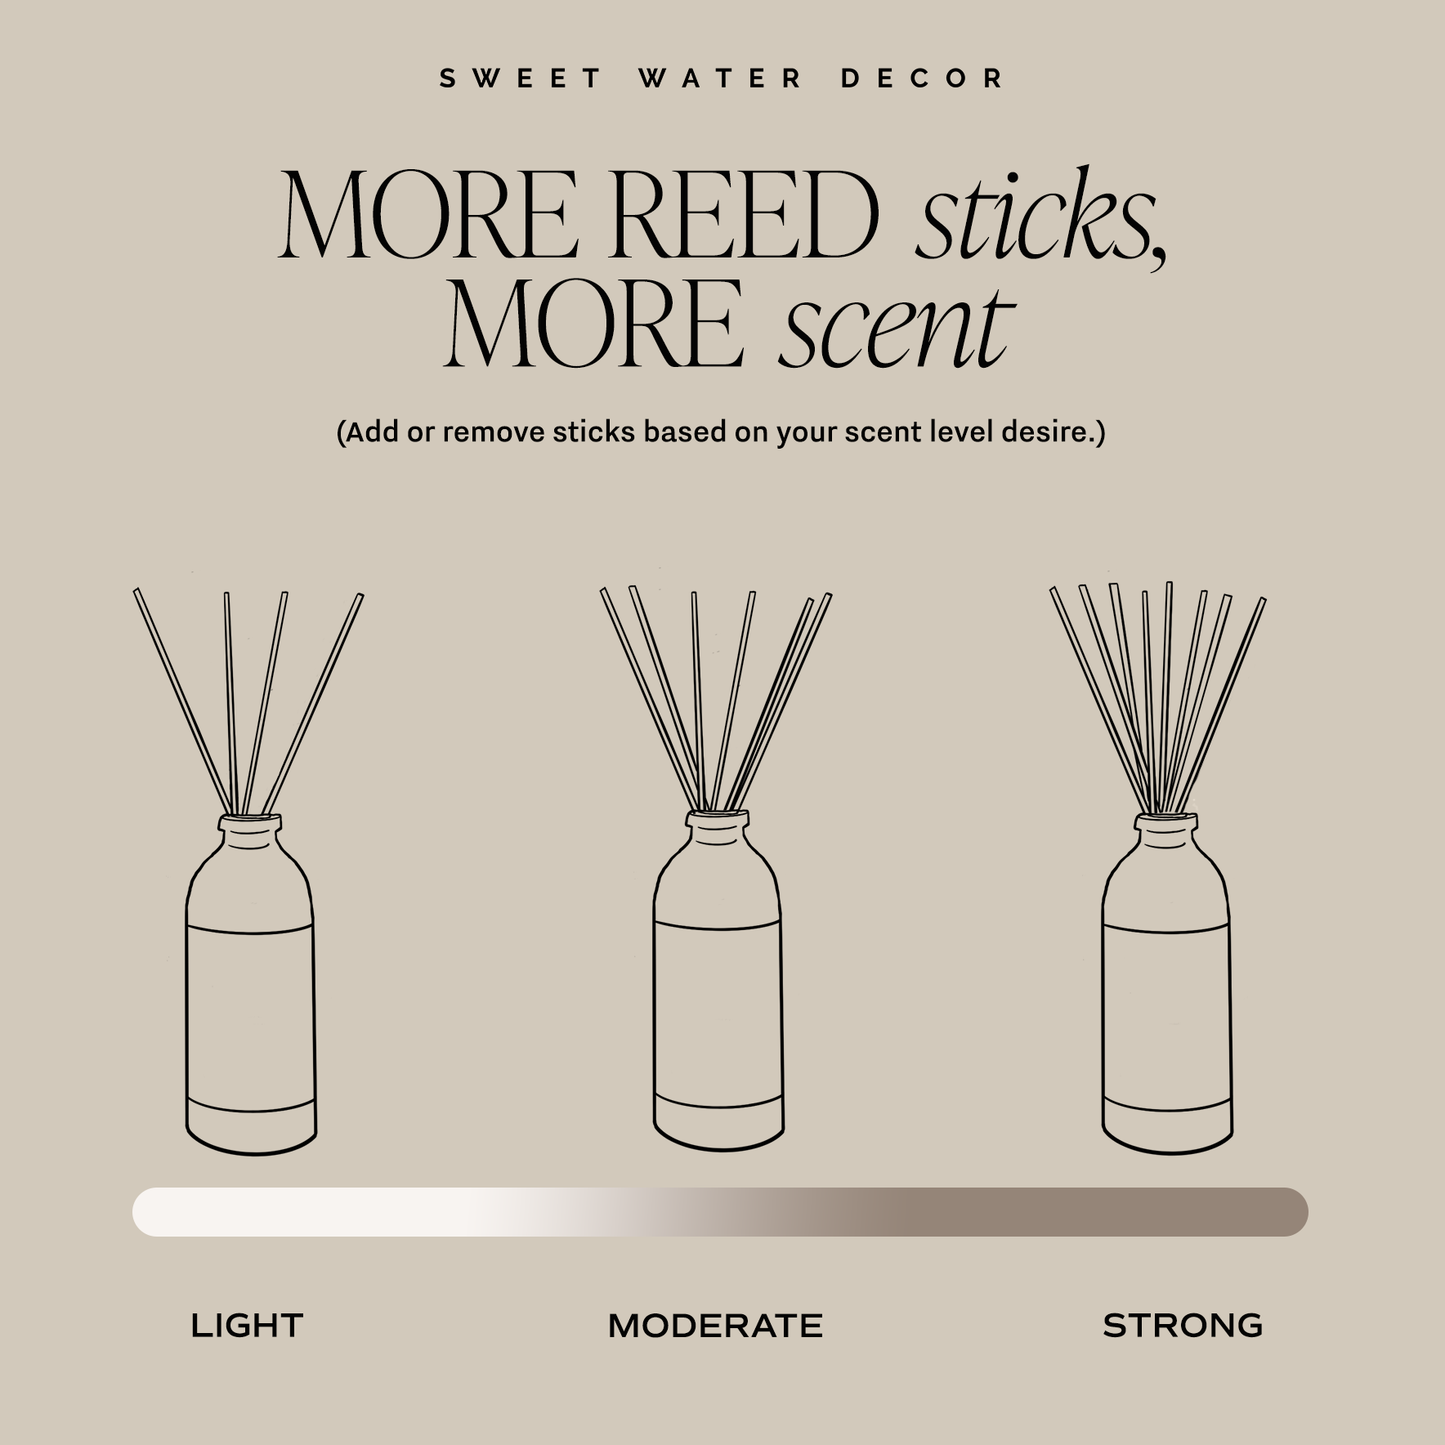 Weekend Reed Diffuser - Gifts & Home Decor